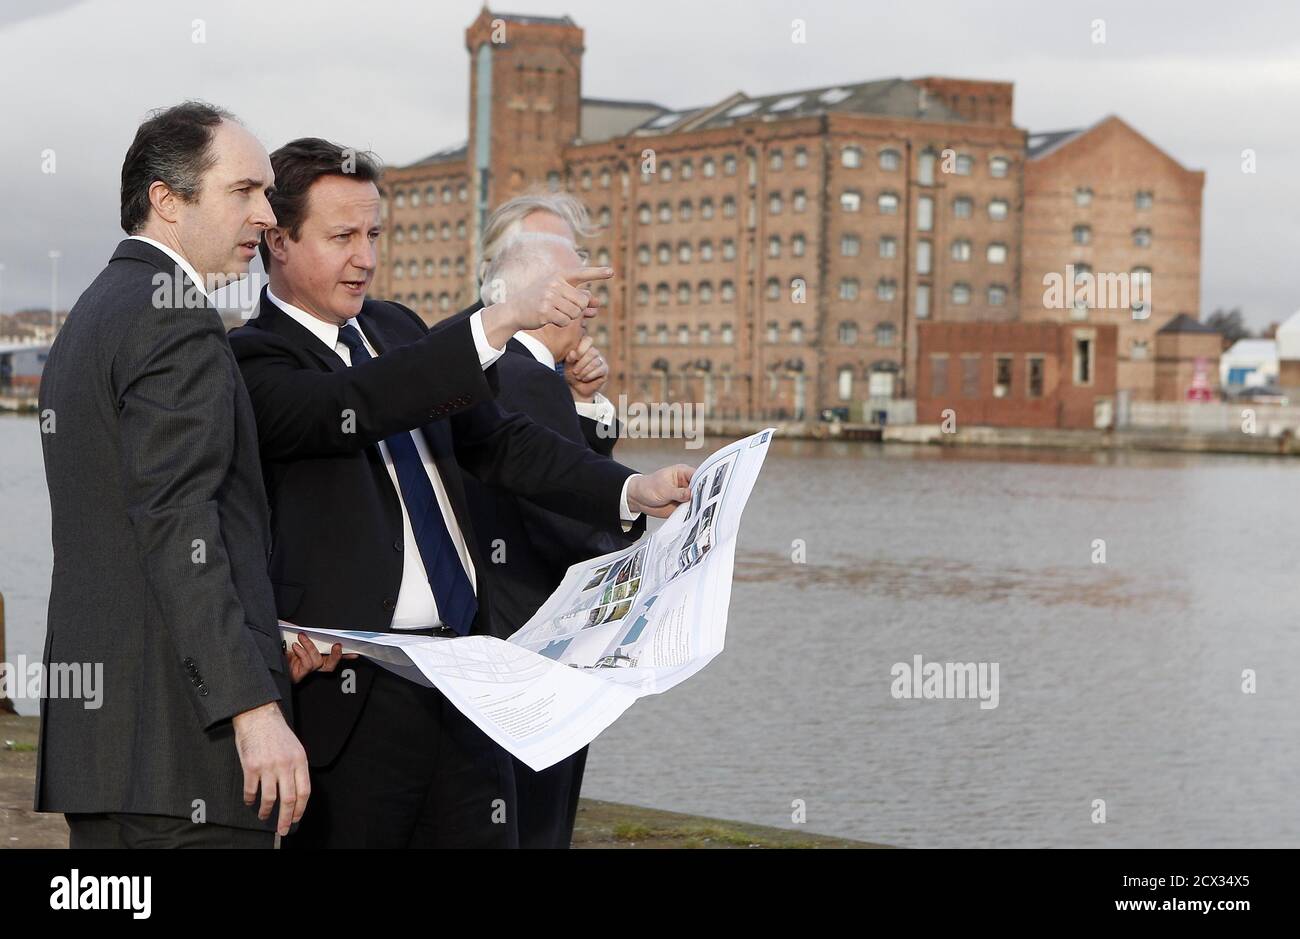 Britain's Prime Minister David Cameron (C) tours the £4.5 billion (6.9 billion US dollars) Wirral Waters development on Merseyside with Richard Mawdsley (L) and Peter Nears of Peel Holdings in Wirral, northwest England January 6, 2011. Britain's path to a sustainable recovery will be tough but is within reach, Prime Minister David Cameron said on Thursday, seeking to shift focus to enterprise and away from his tough agenda of tax hikes and spending cuts. REUTERS/Peter Byrne/POOL  (BRITAIN - Tags: POLITICS BUSINESS) Stock Photo